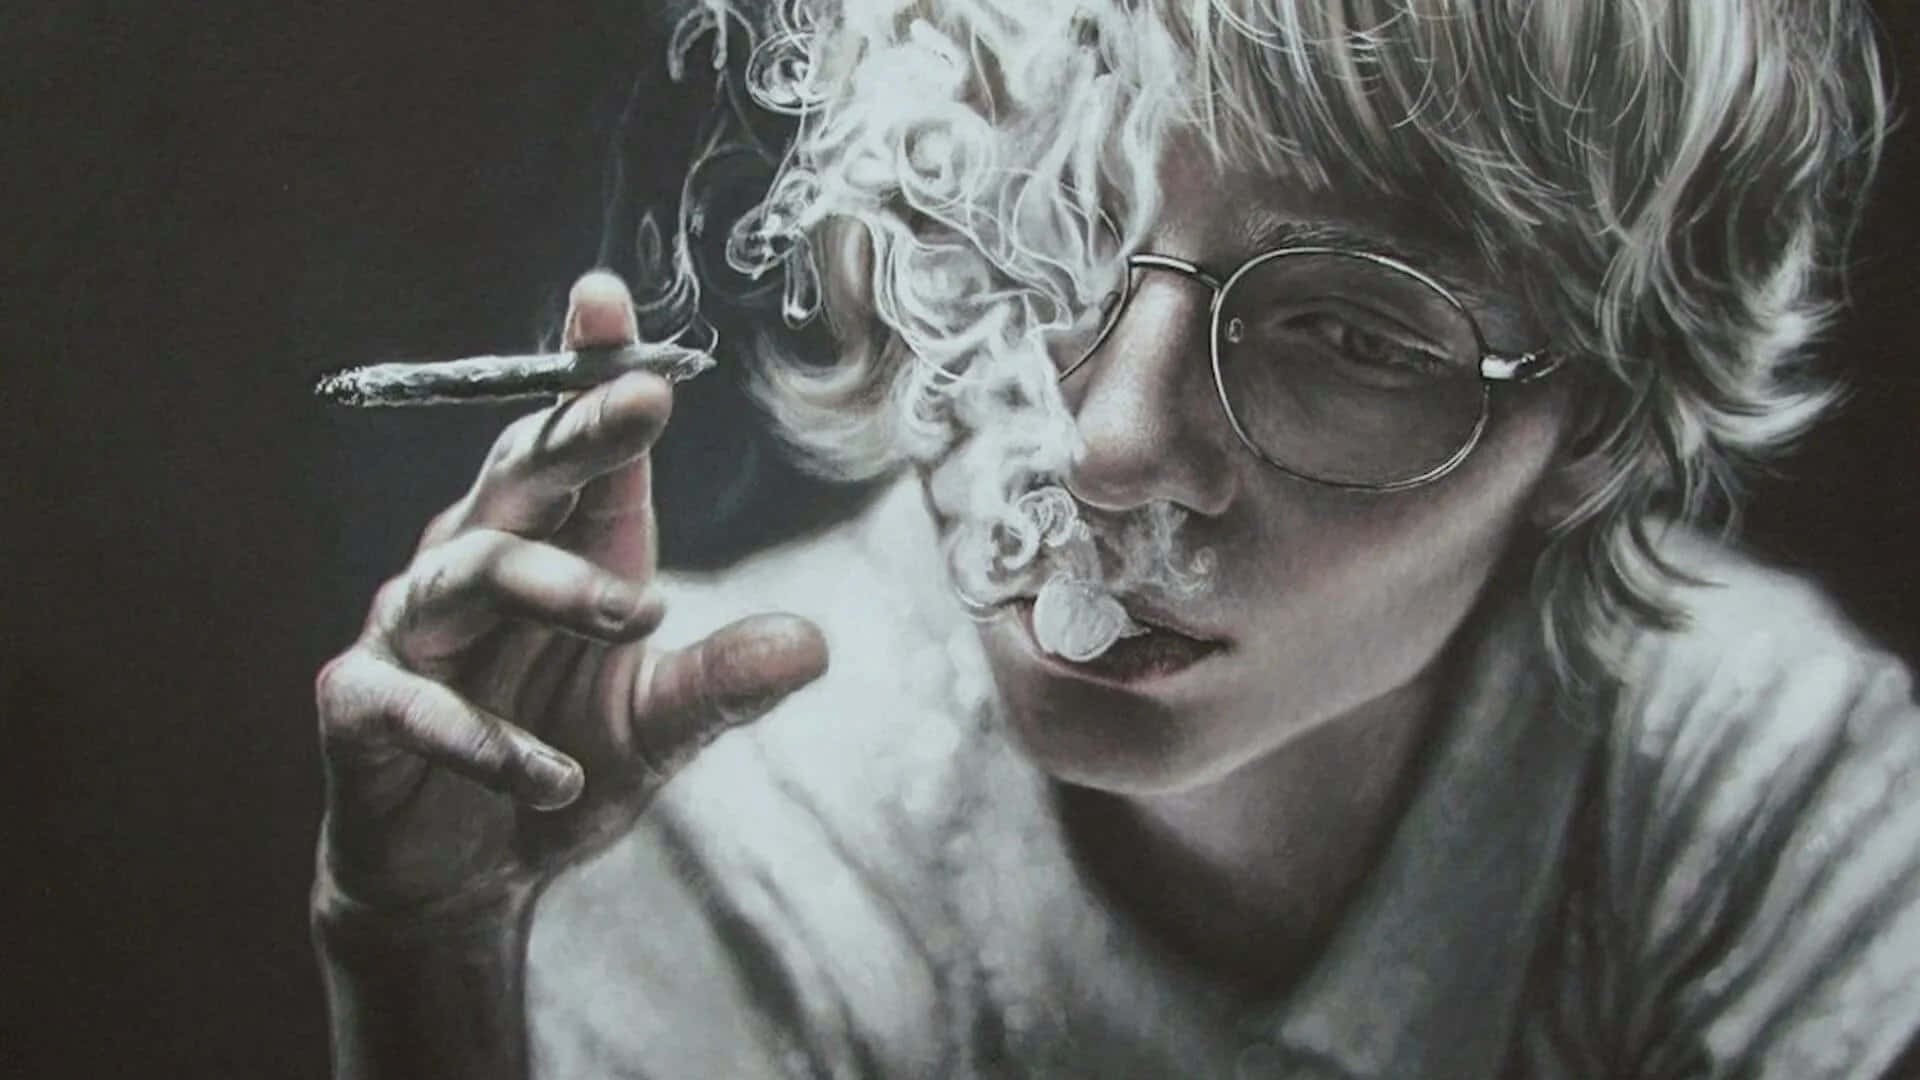 A Painting Of A Boy Smoking A Cigarette